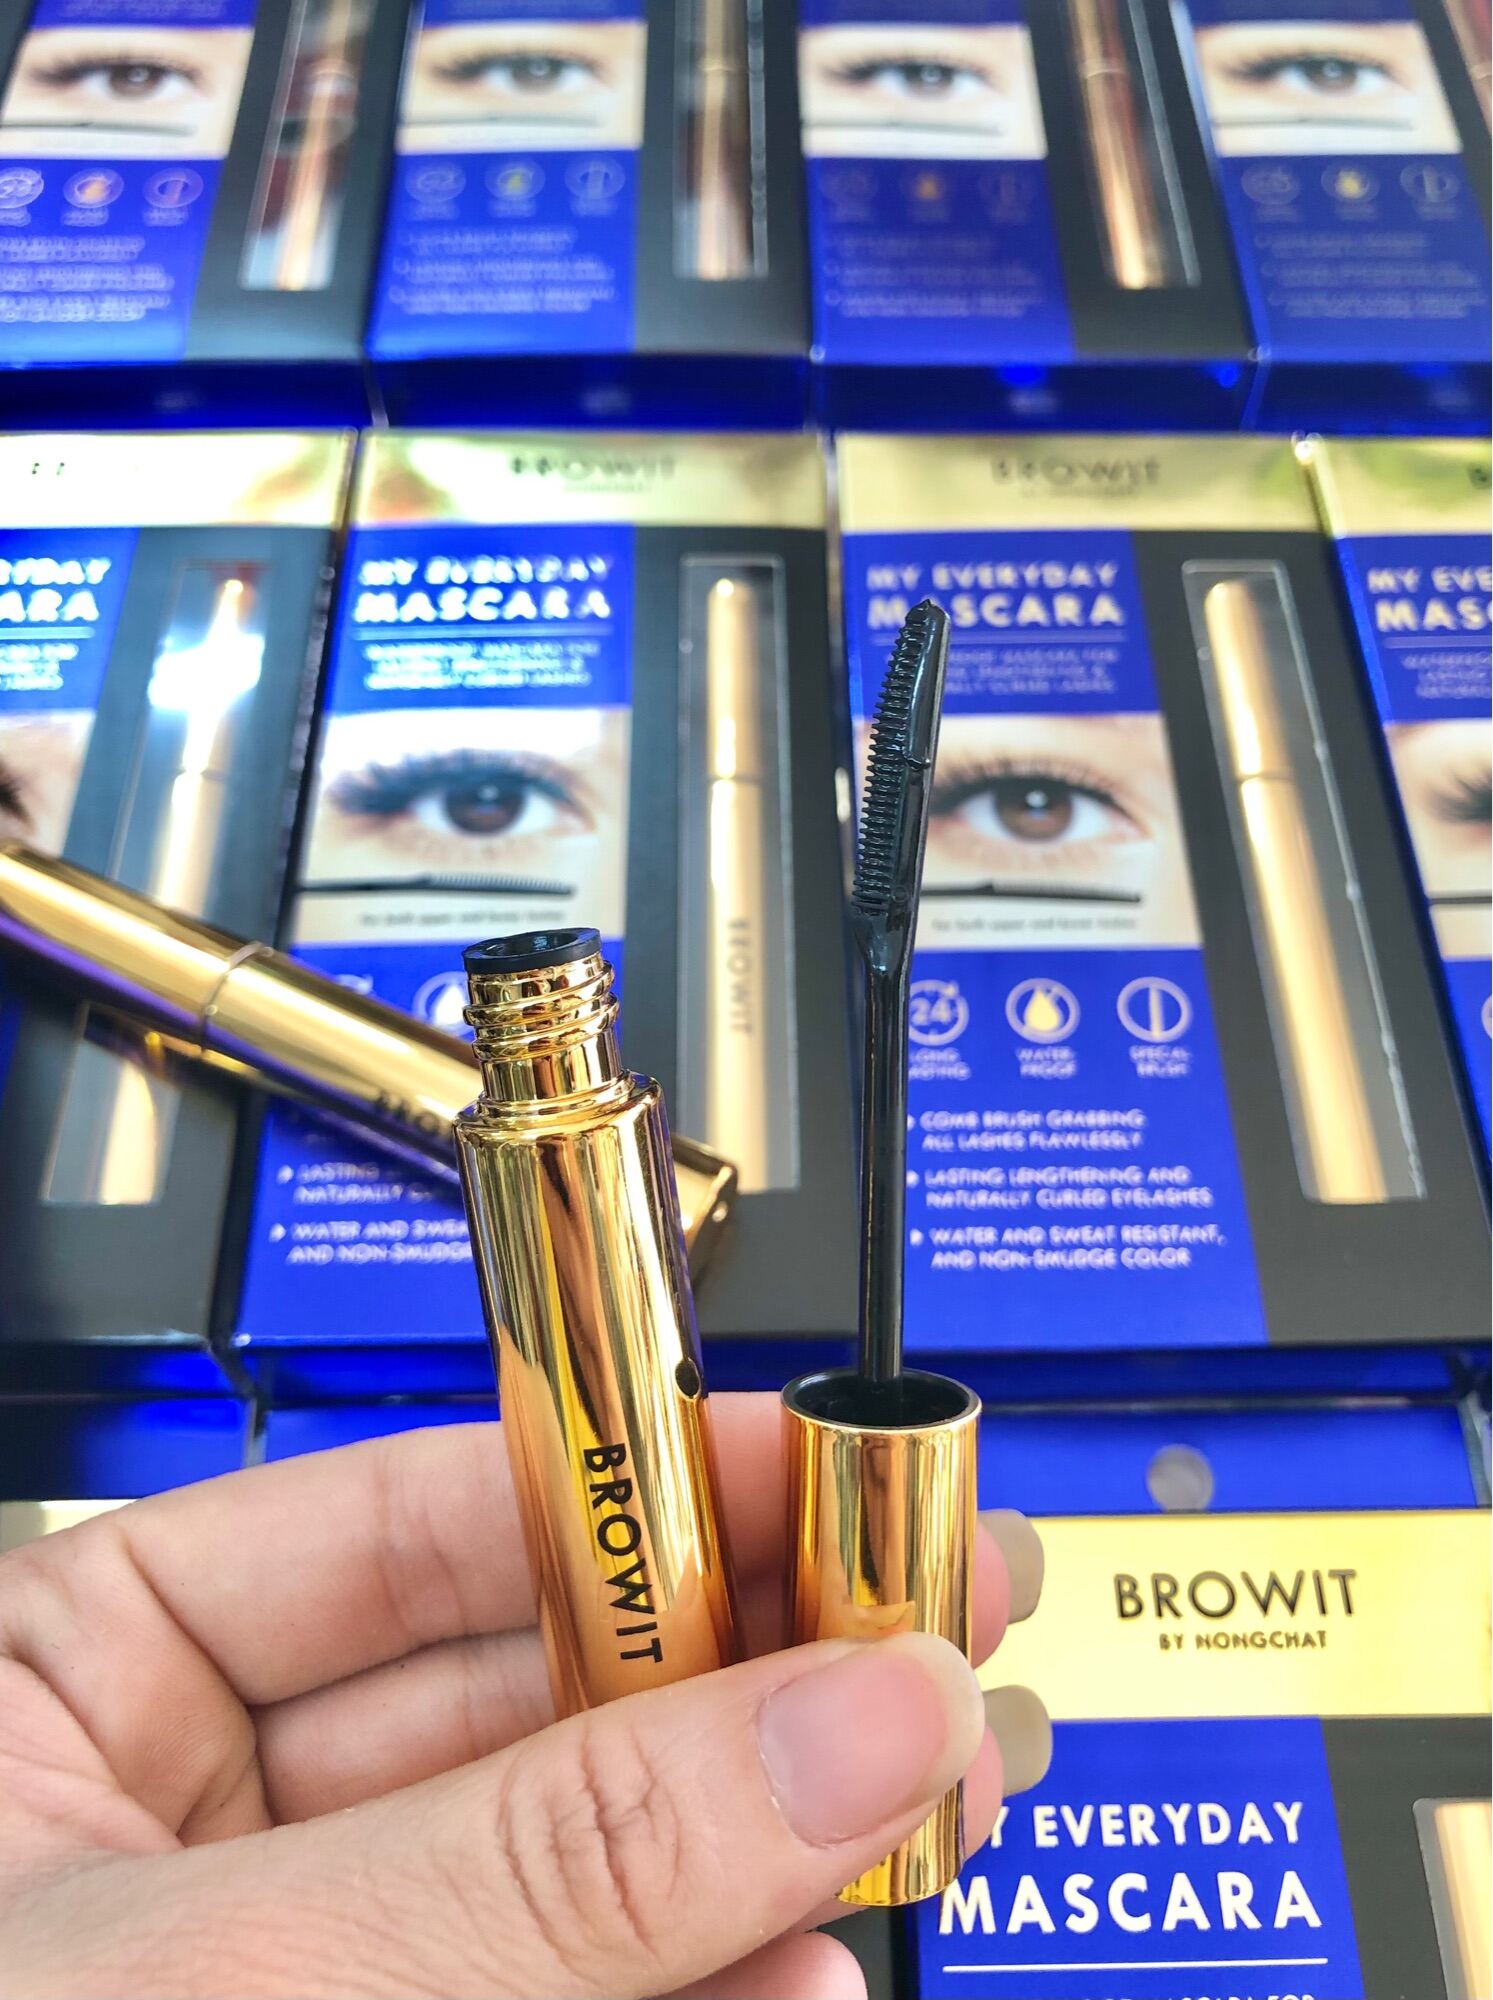 Mascara Browit By Nongchat